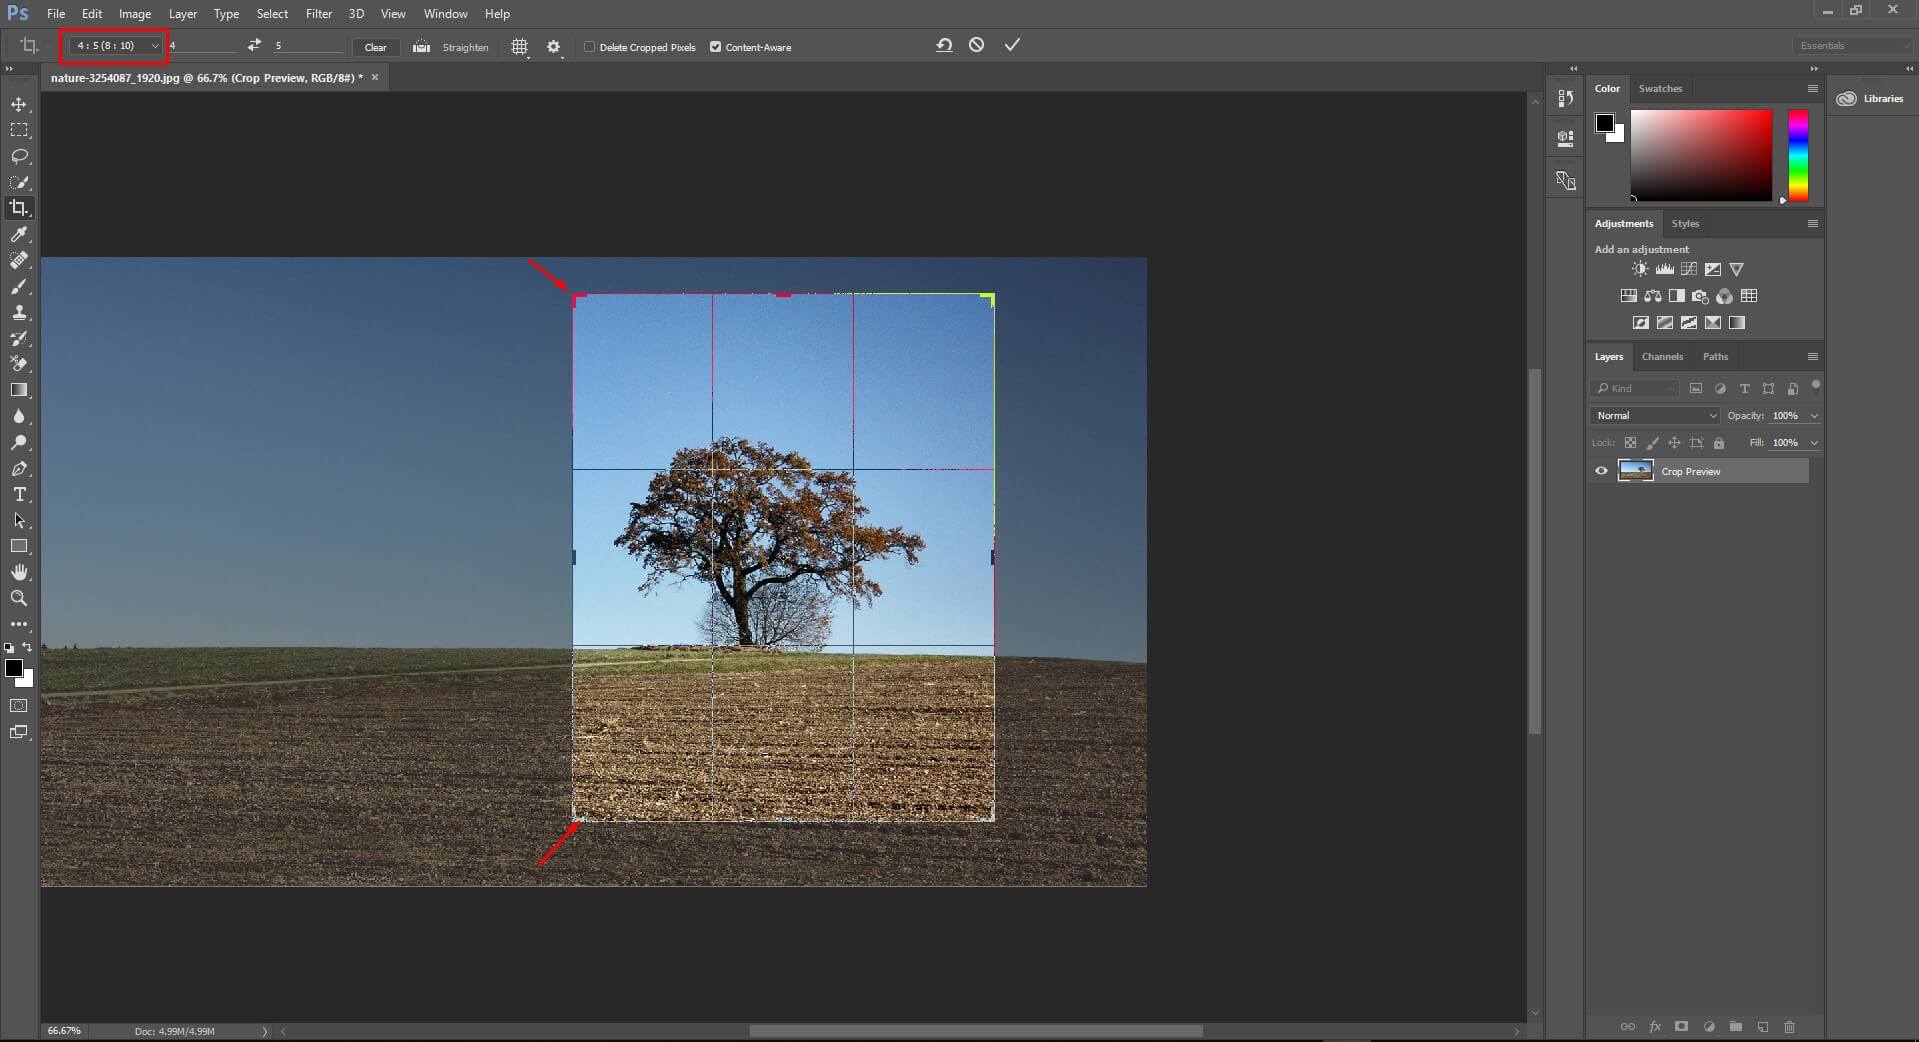 Cropping tool and Straighten Images